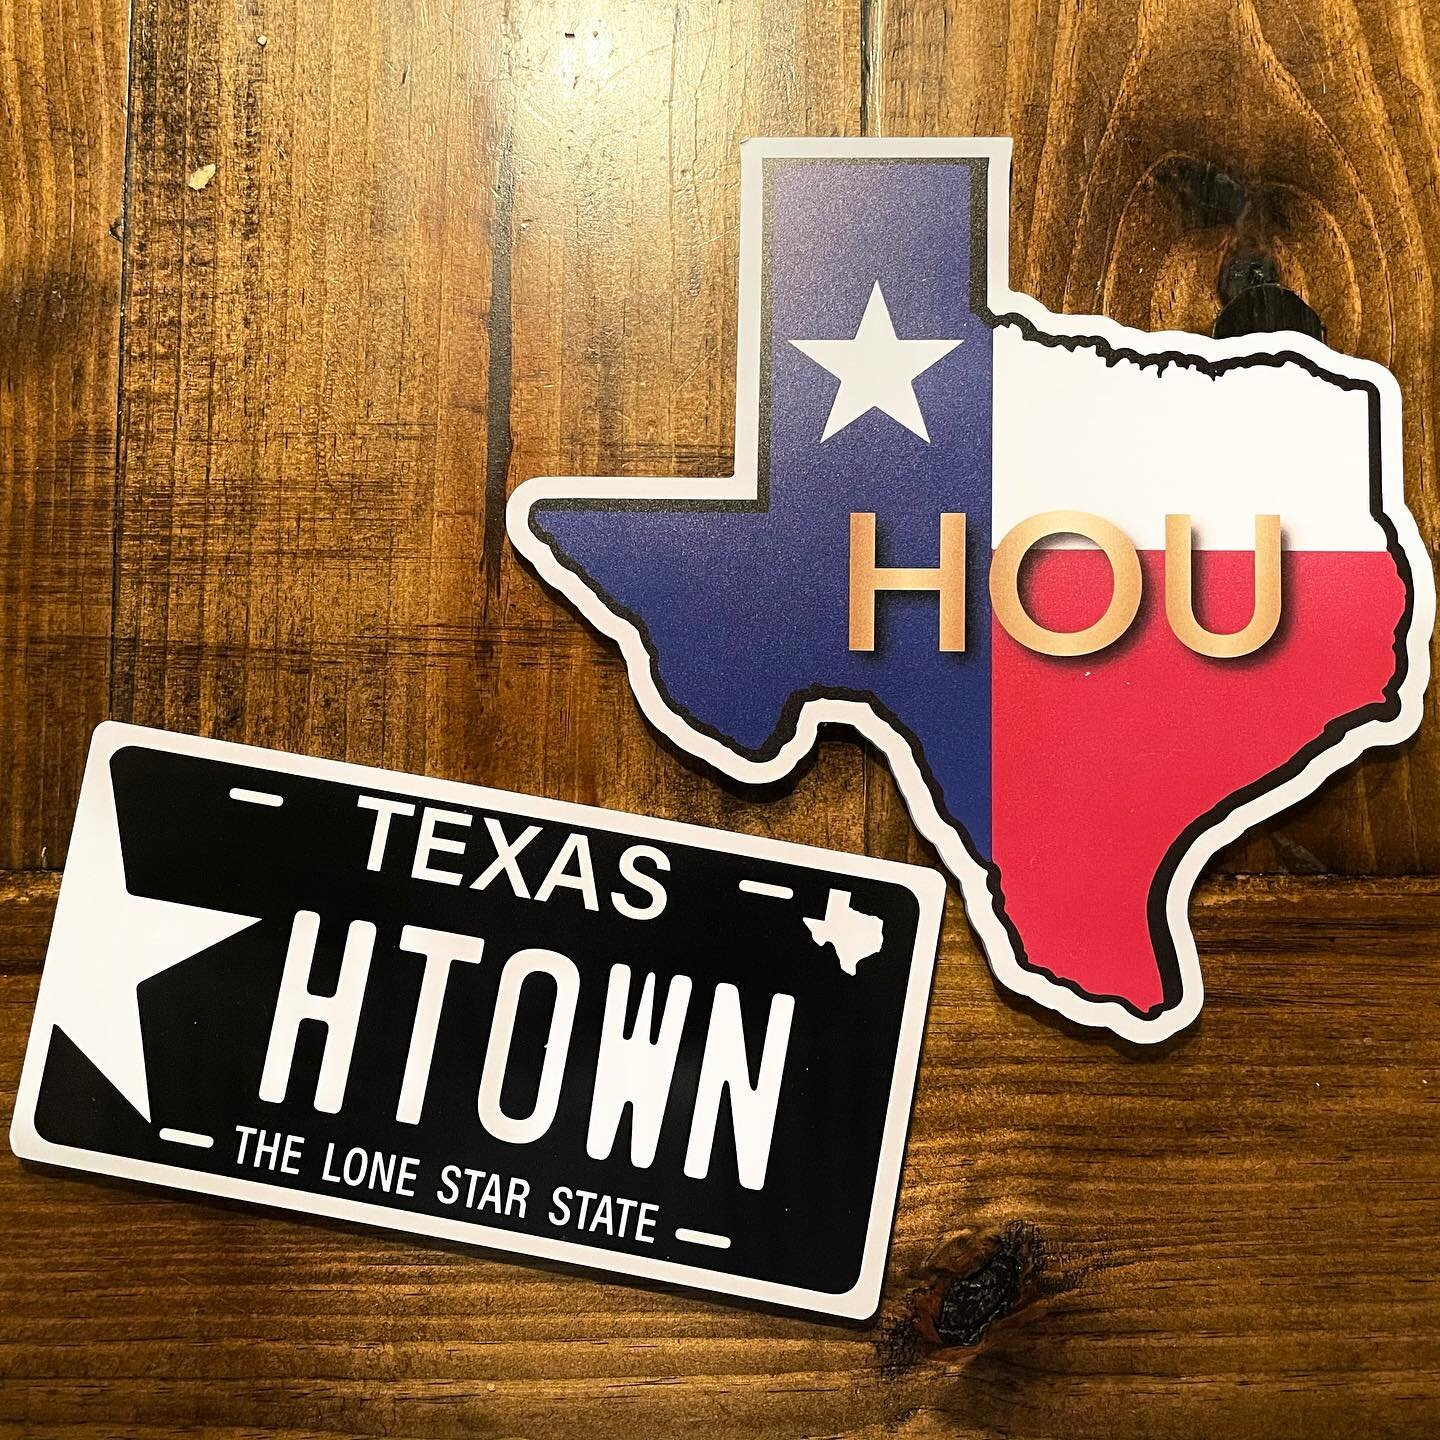 Our most popular prop, the HTOWN license plate recently walked off or got left behind at an event. I contacted @lushpartystudio.props to order a replacement and today when the package arrived I was surprised to find another awesome Texas themed prop 